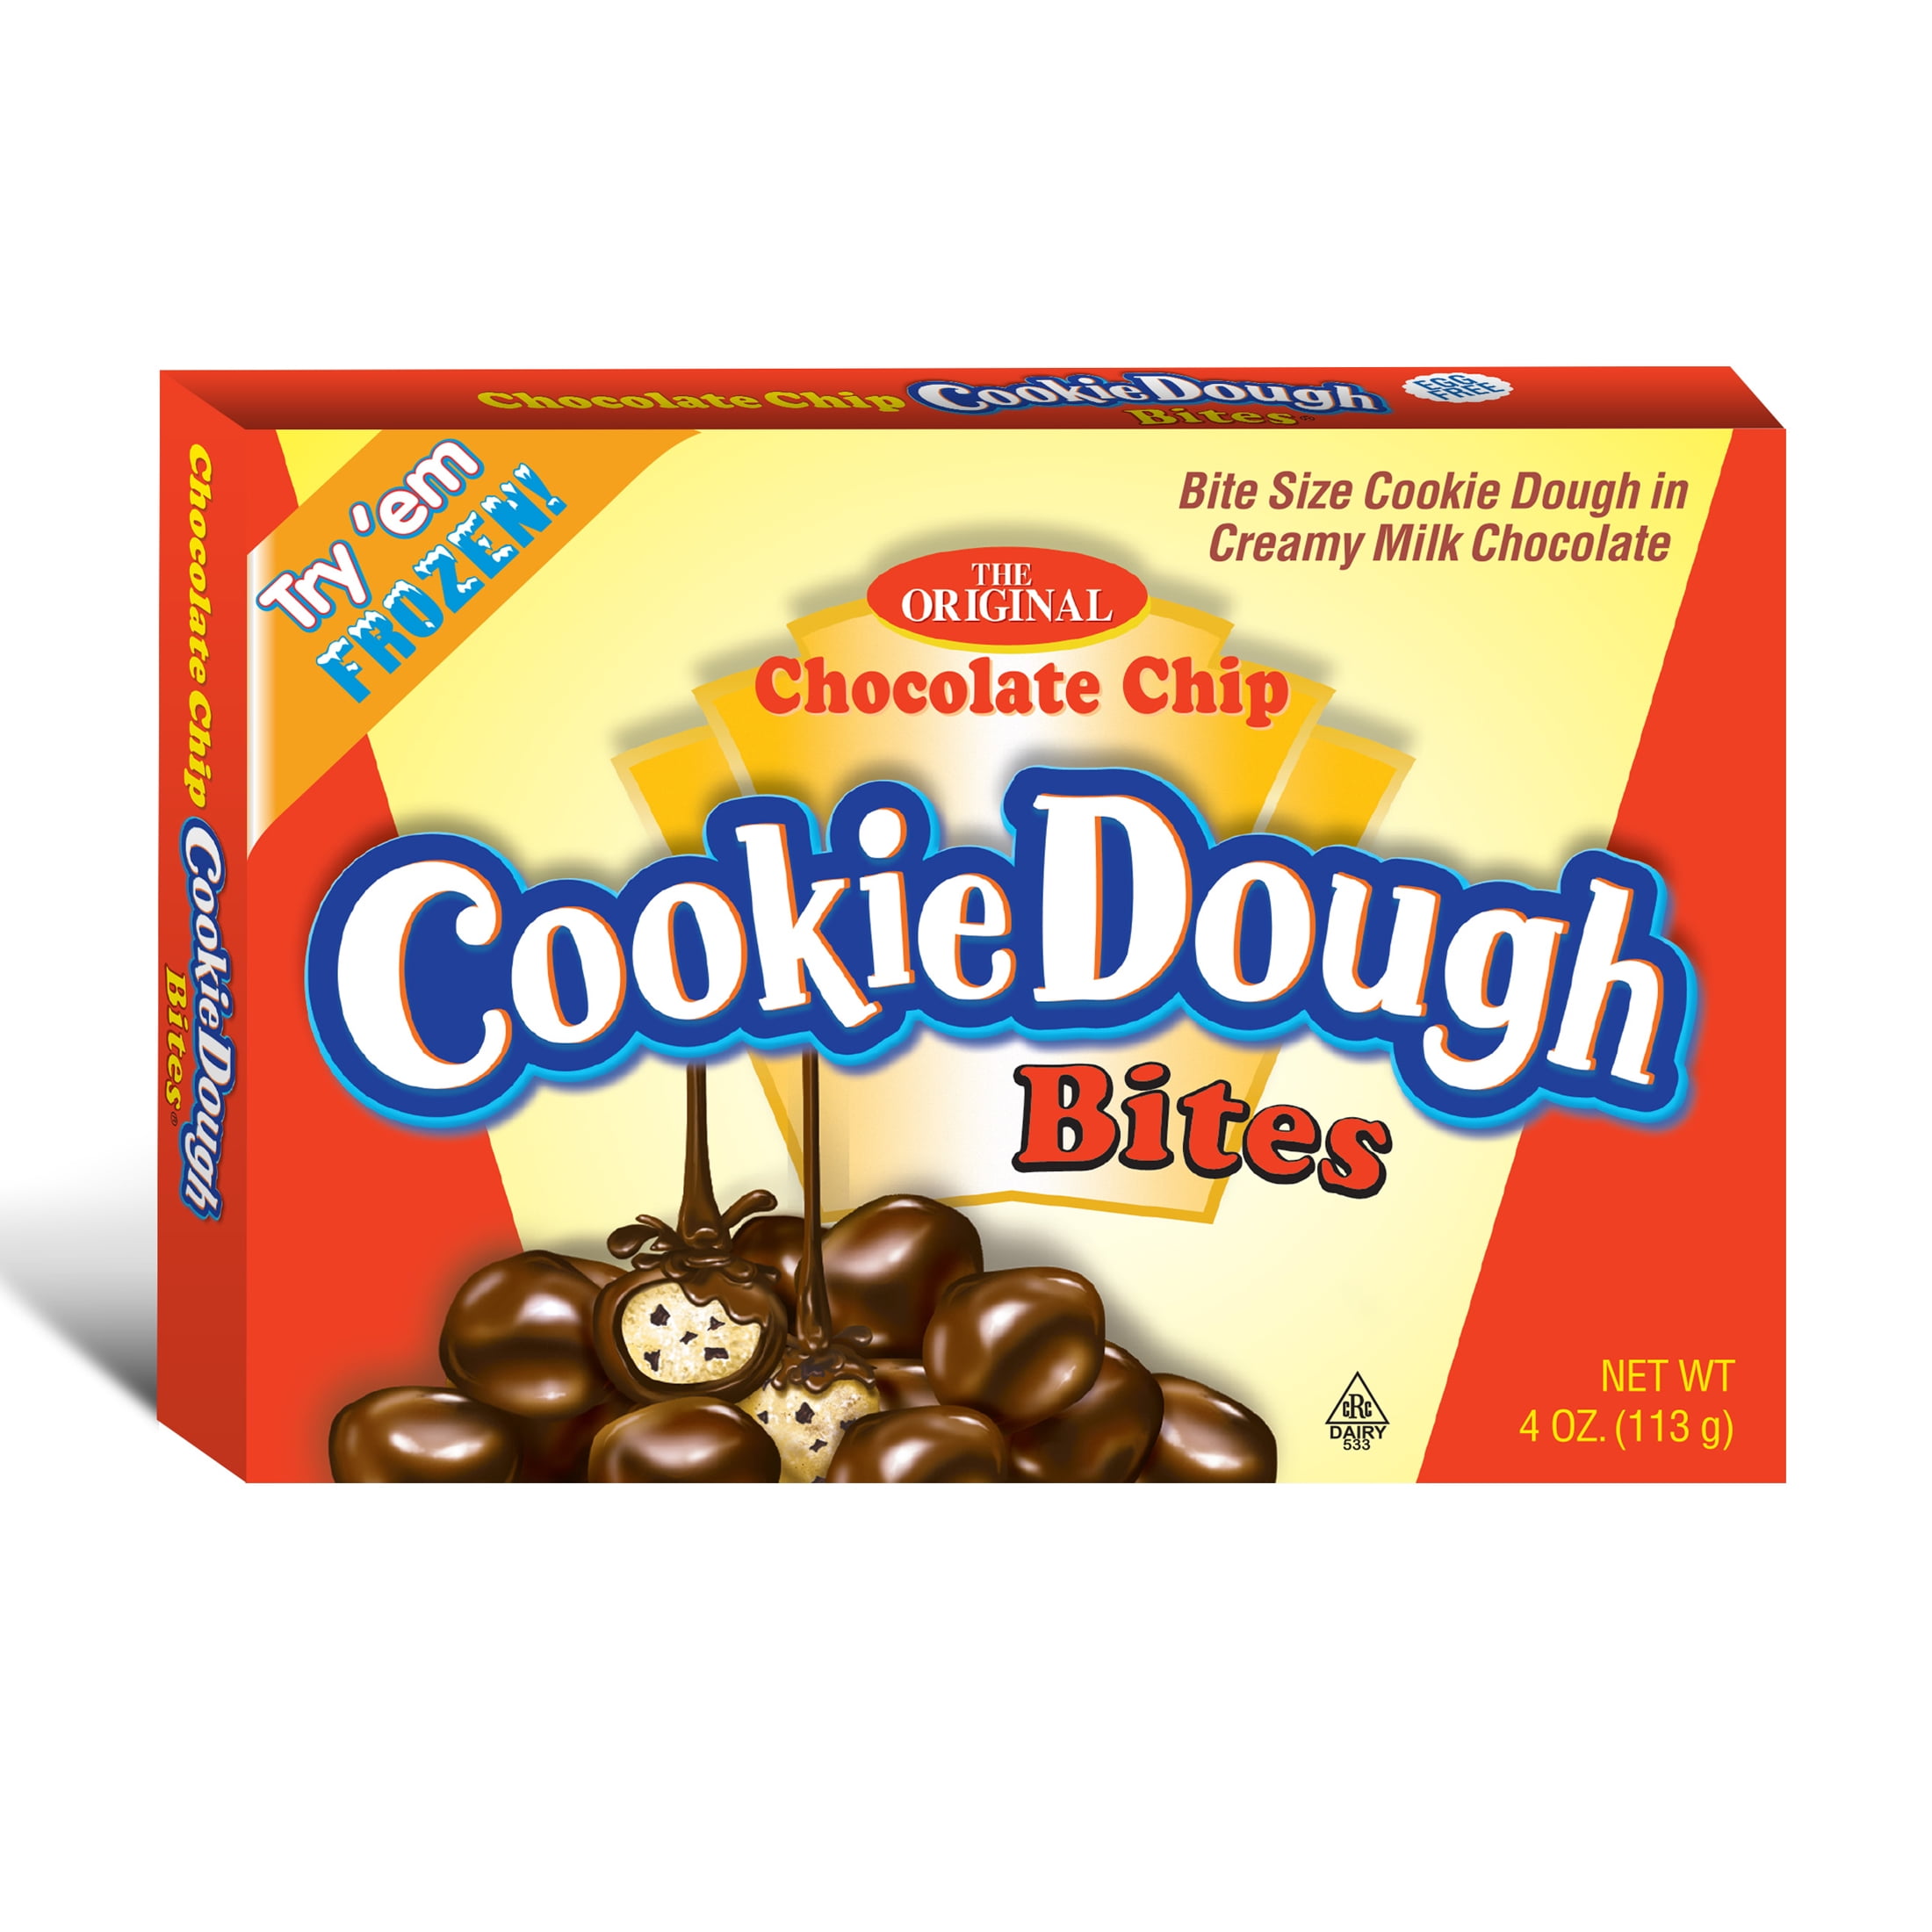 Bite Size Cookie Dough in Creamy Milk Chocolate in a Theater Box by Taste  of Nature